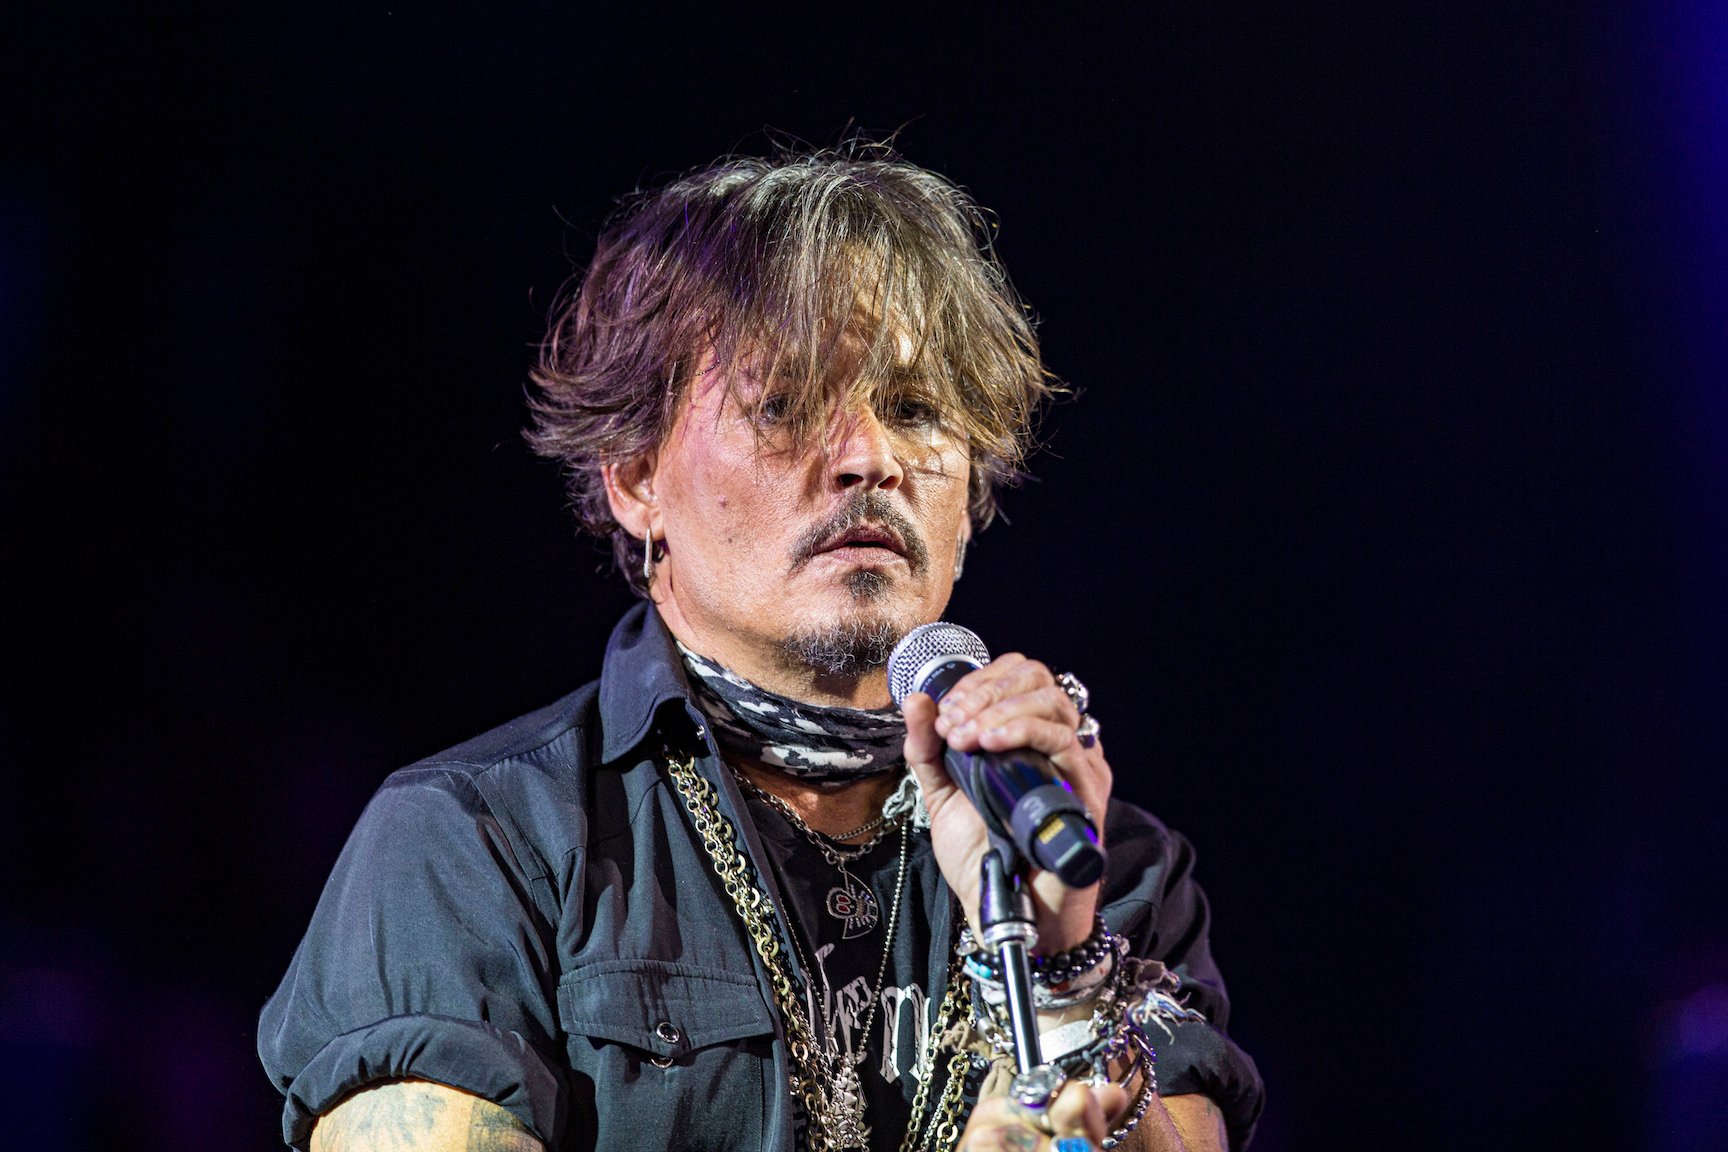 Johnny Depp performs on stage at Celebrity Theatre on Dec. 14, 2019